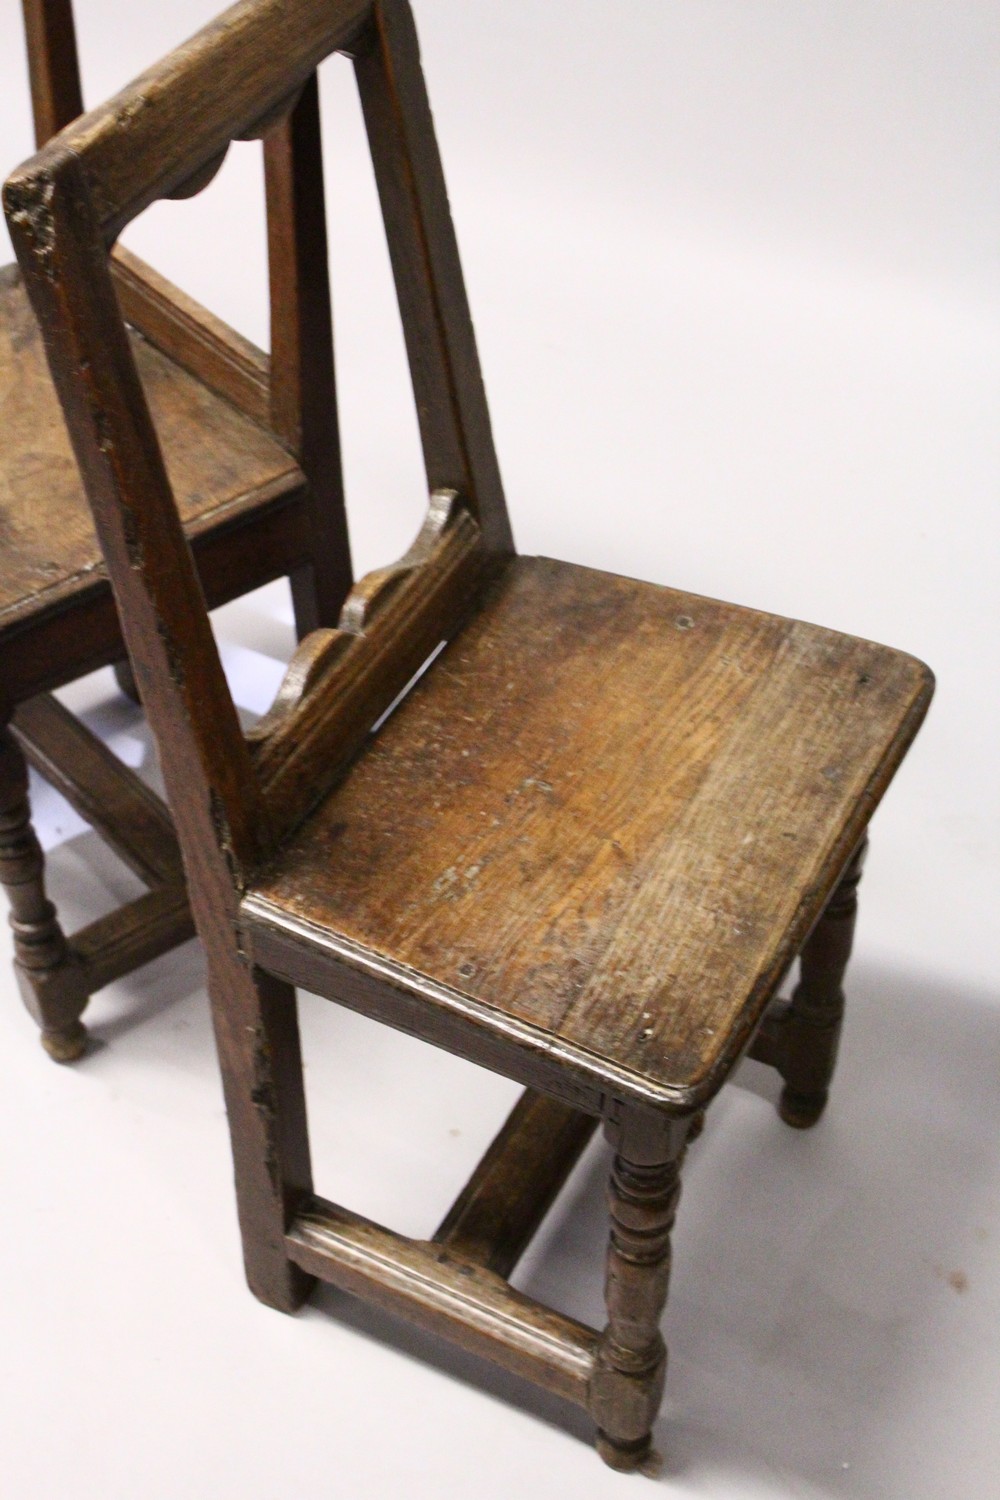 FOUR SMALL 18TH CENTURY OAK DINING CHAIRS, with framed backs, solid seats, on turned and stretchered - Image 5 of 9